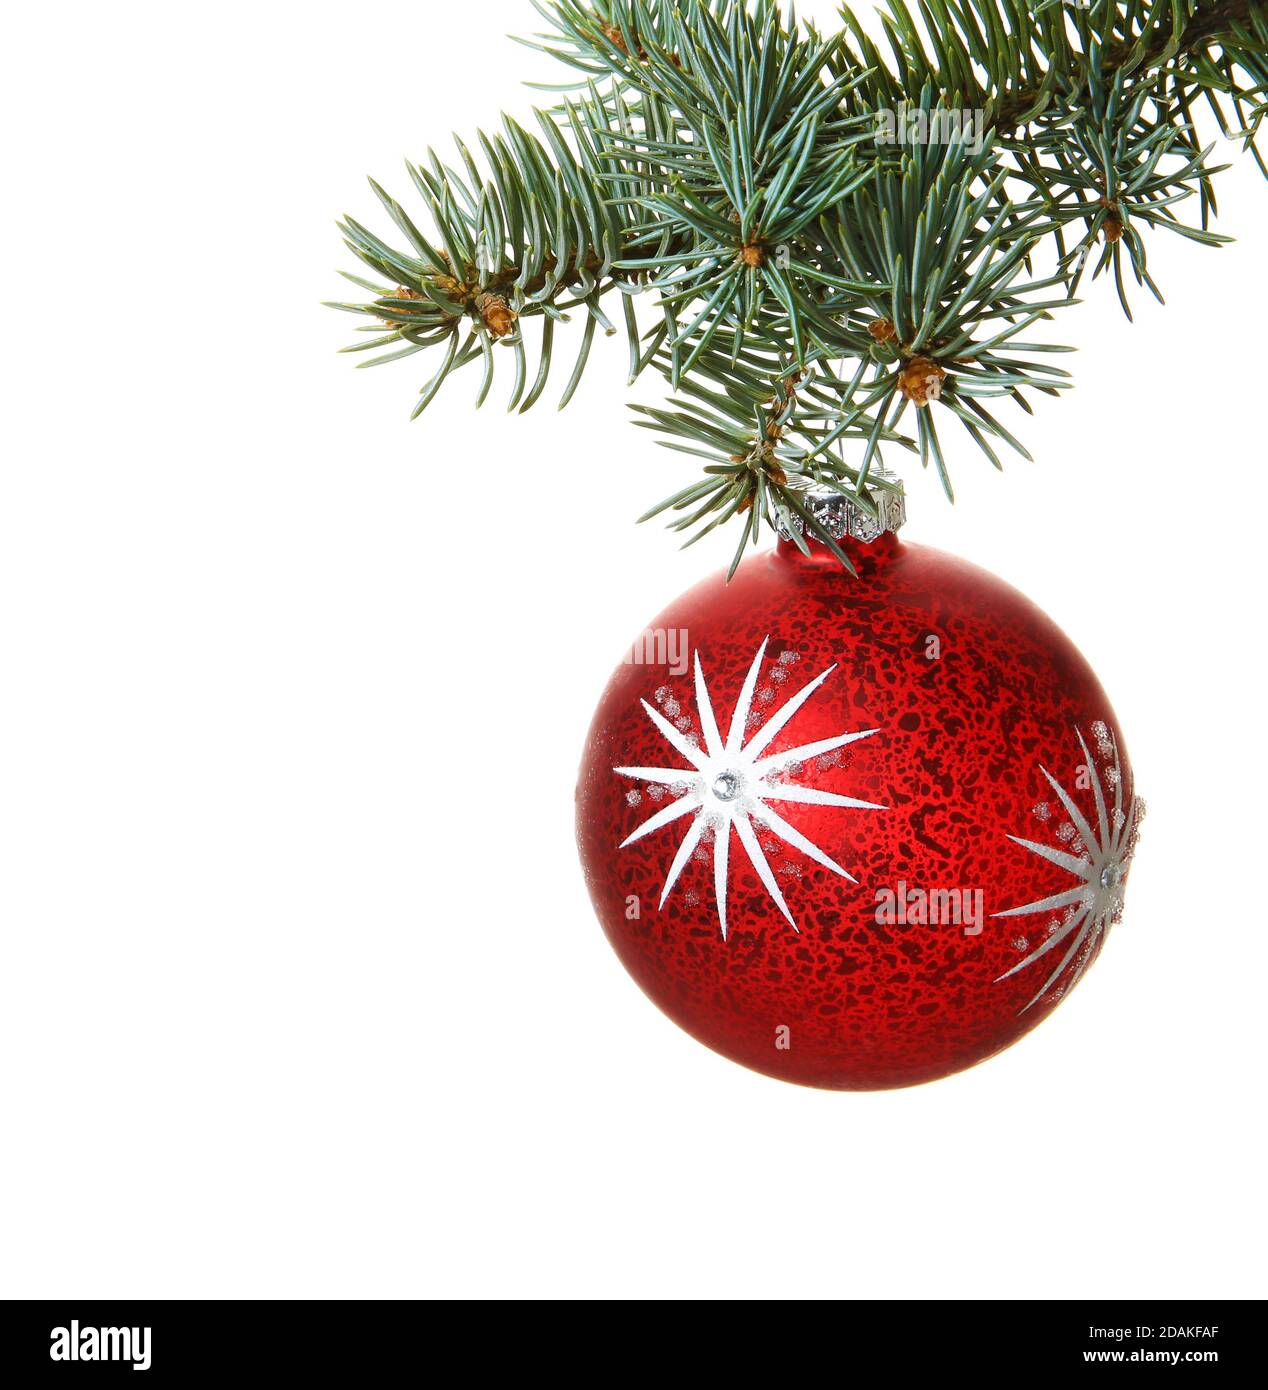 Christmas decoration isolated on the white background. Christmas ball on spruce tree branch. Stock Photo